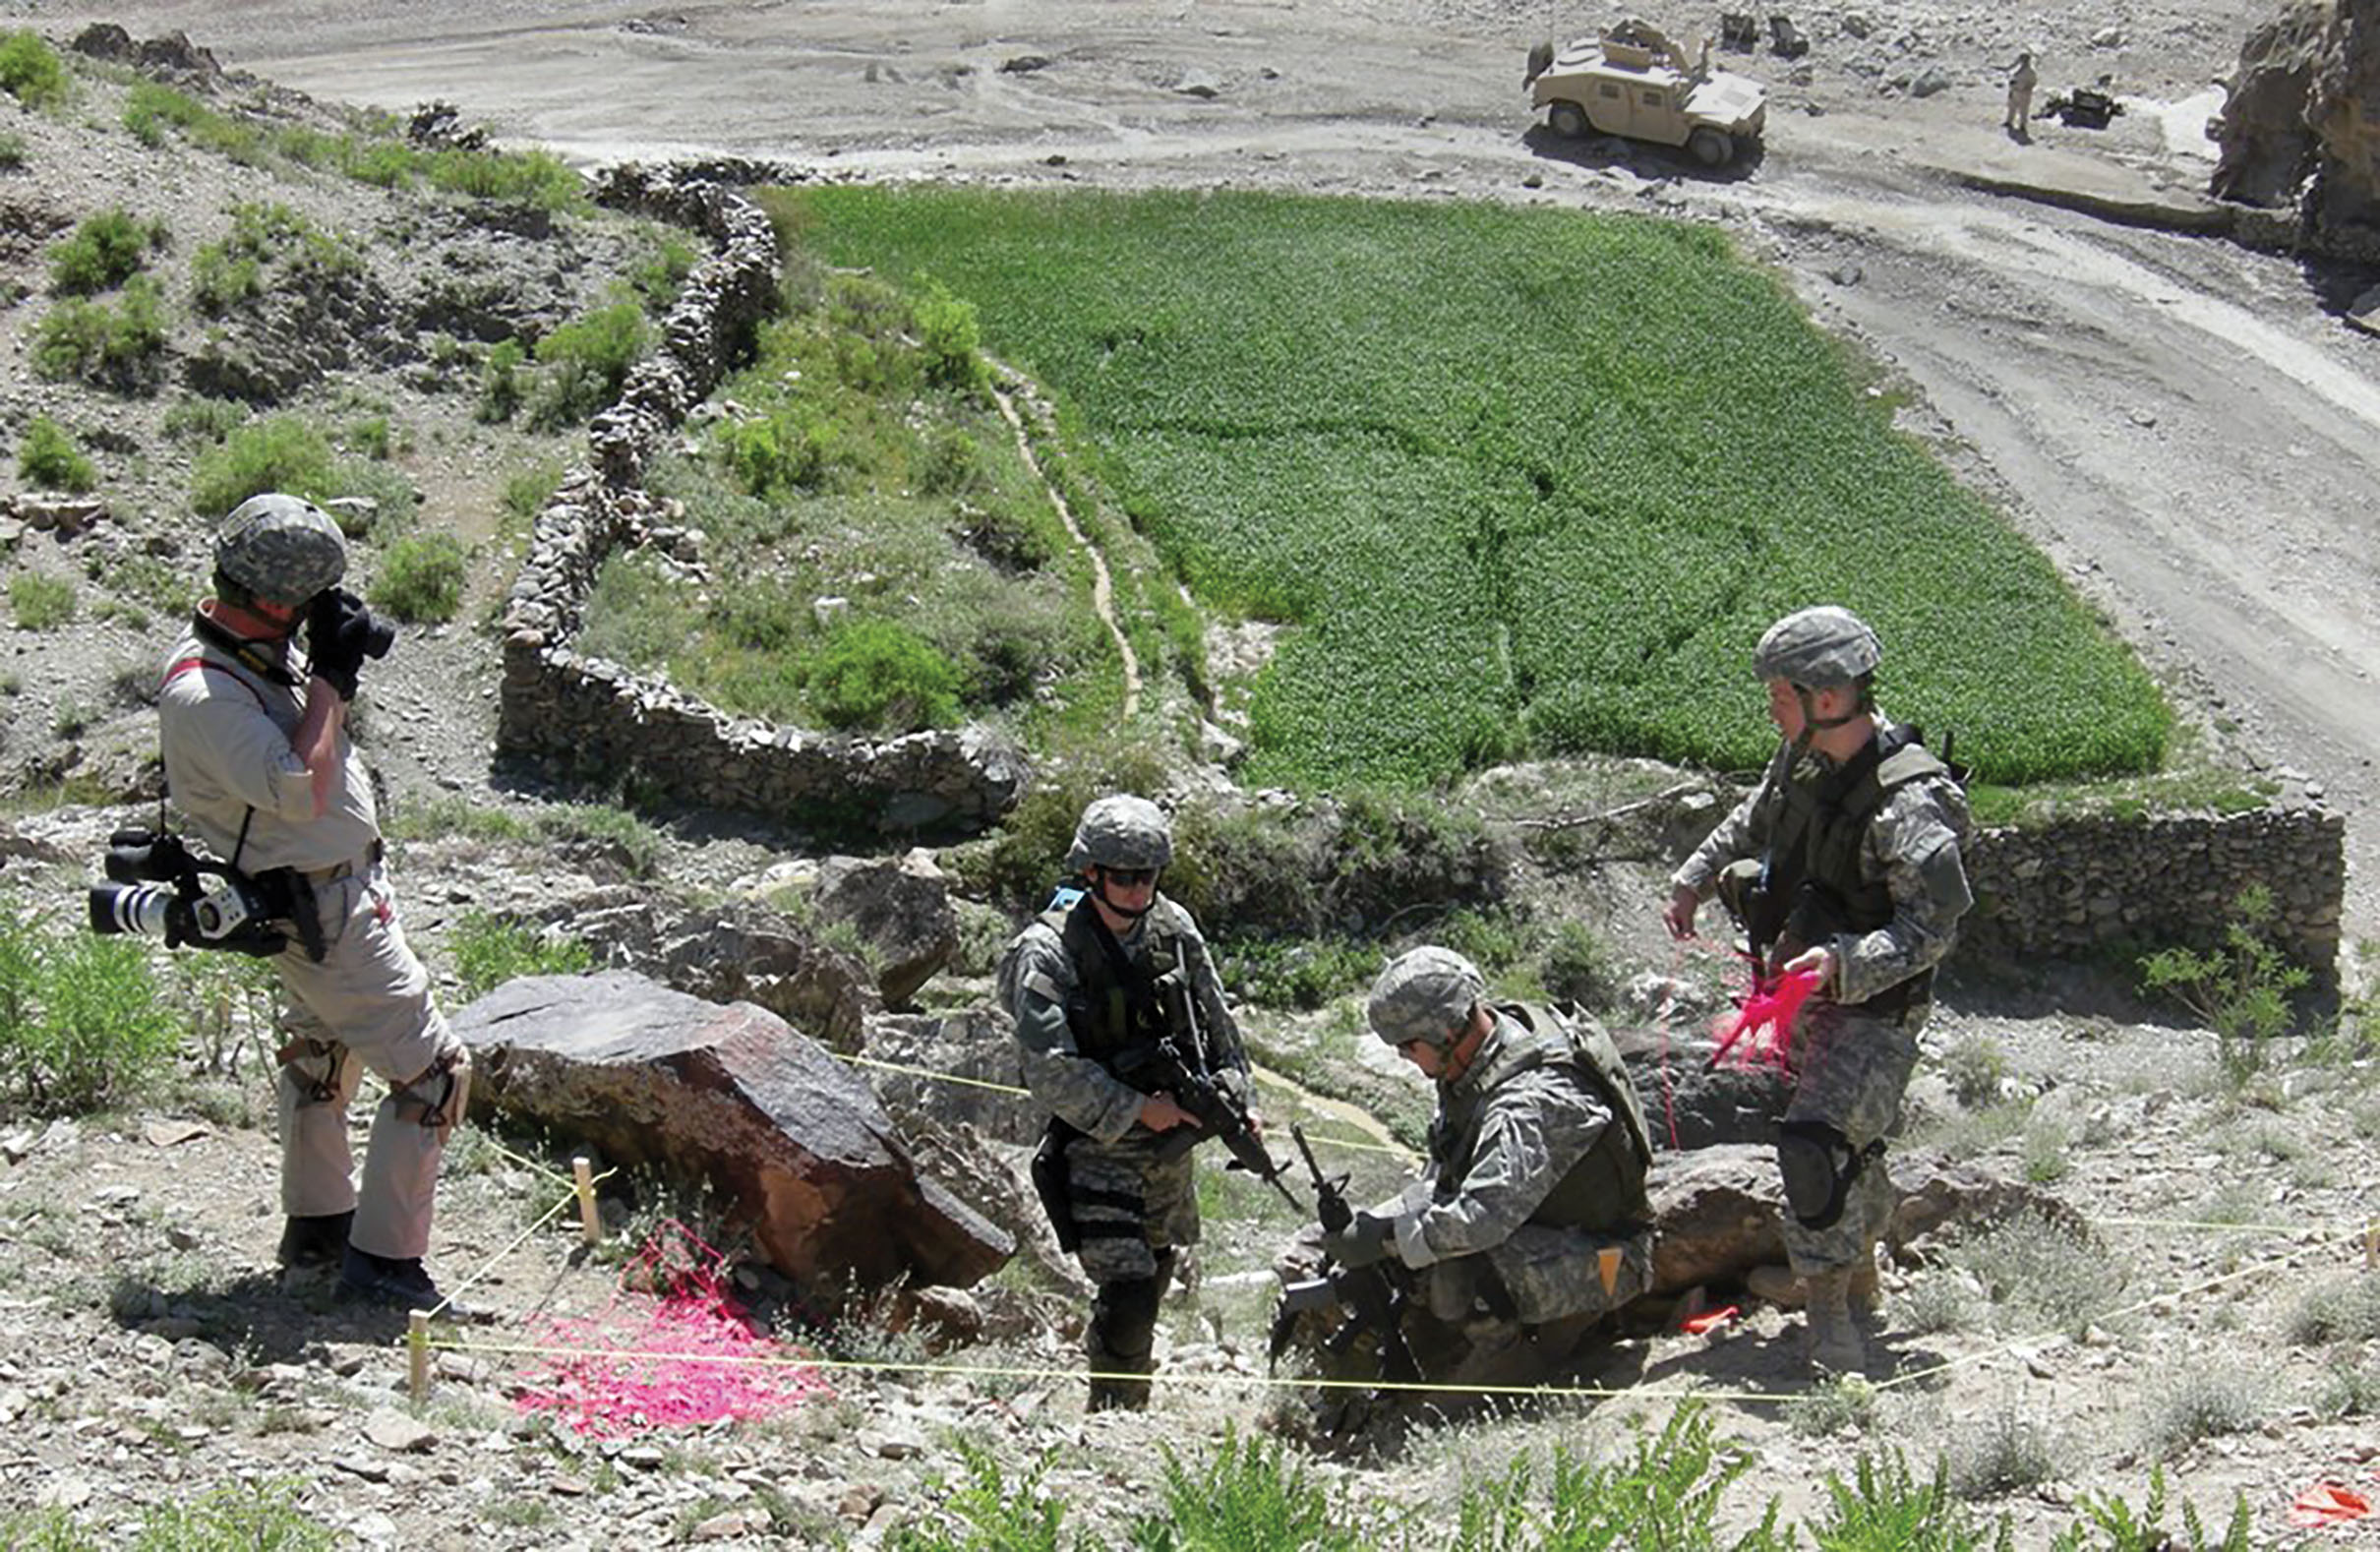 As part of the investigation into Tillman’s death, Army Criminal Investigation Division personnel re-enact the friendly fire incident in April 2006. / U.S. Army